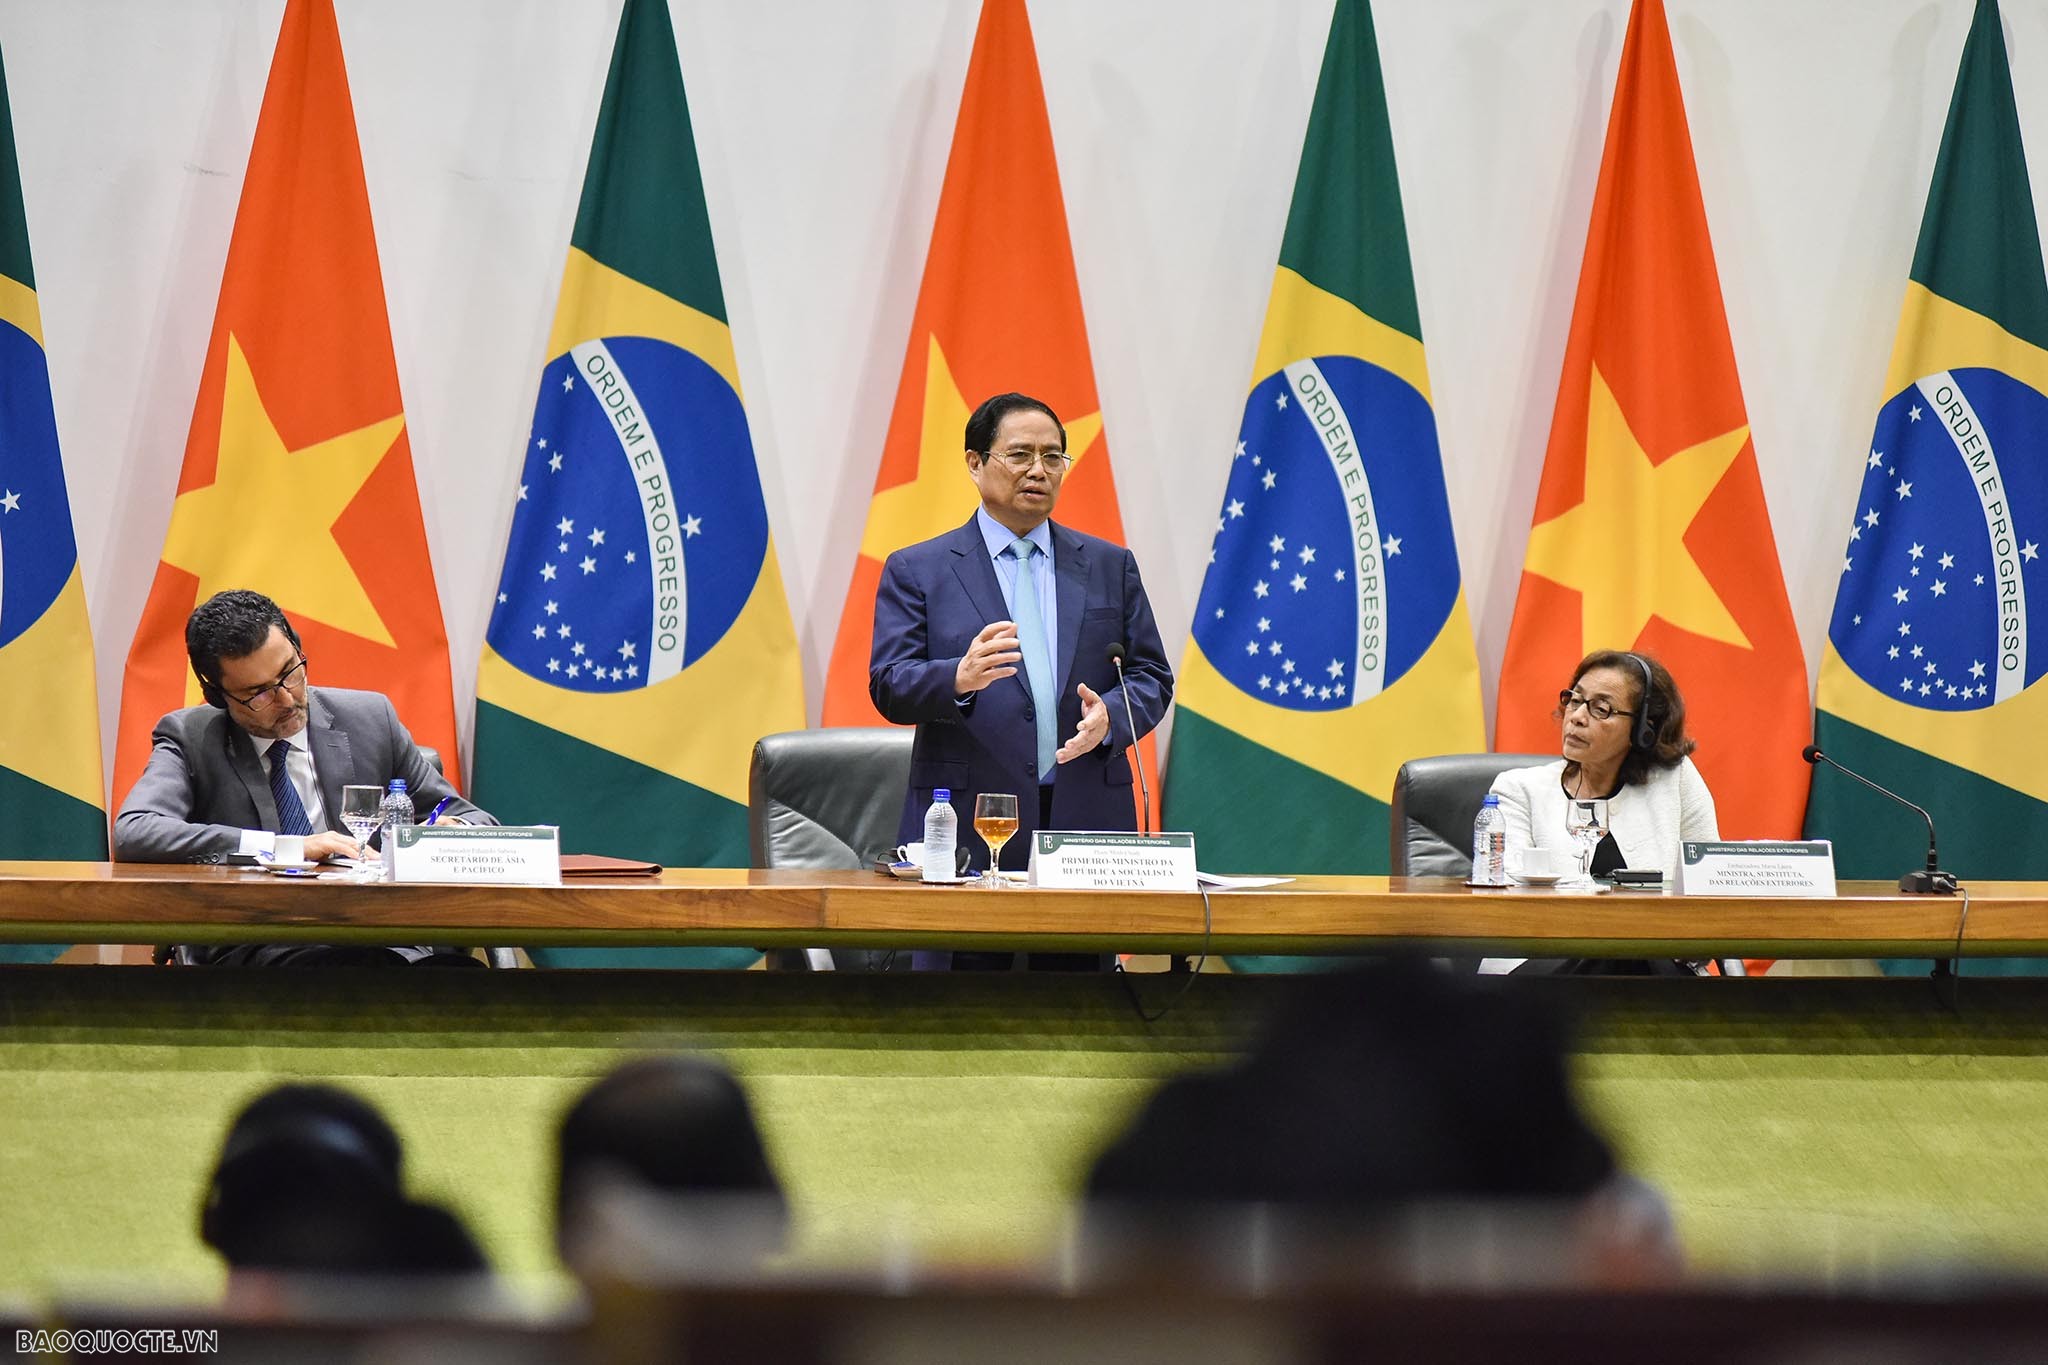 PM Pham Minh Chinh delivered speech, highlighting five measures to elevate Vietnam – Brazil ties